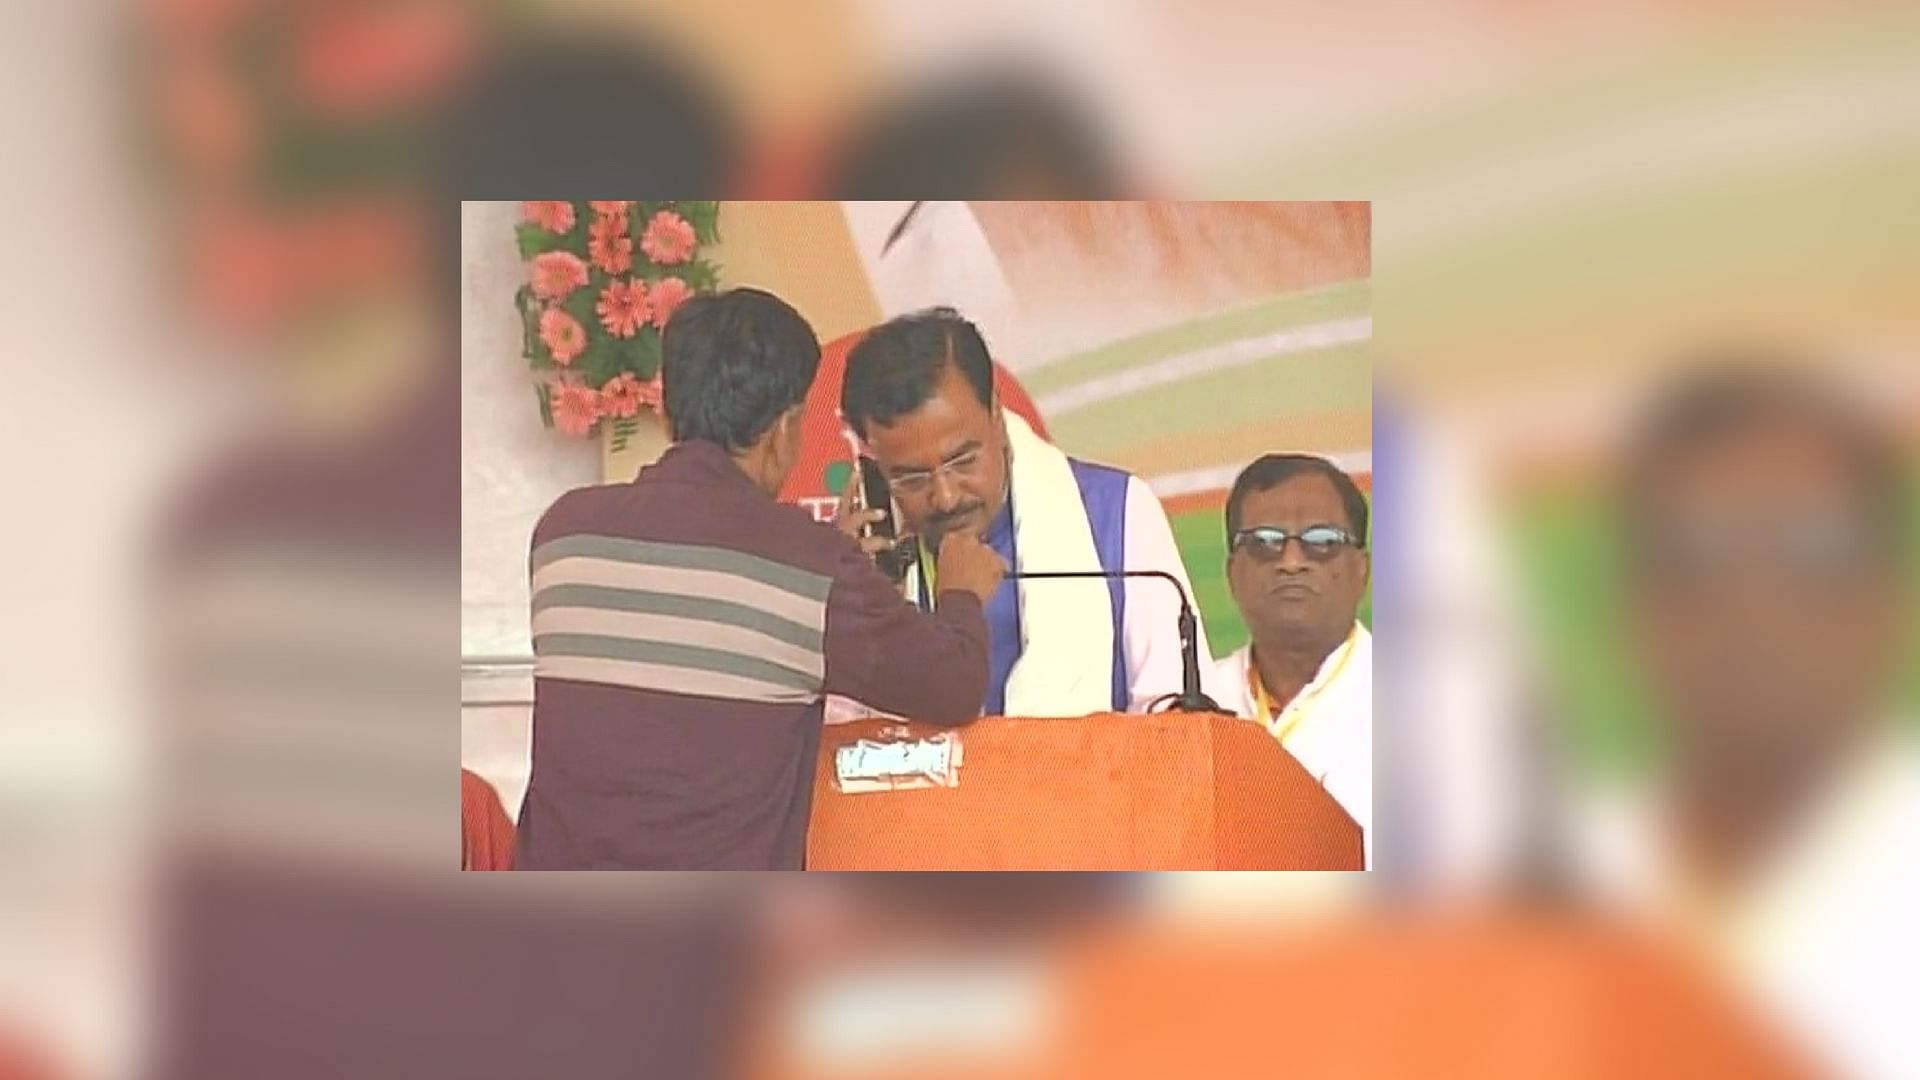 Prime Minister soon addressed the Bahraich gathering through a mobile phone. (Photo Courtesy: Twitter.com/<a href="https://twitter.com/ANI_news">ANI_news</a>)